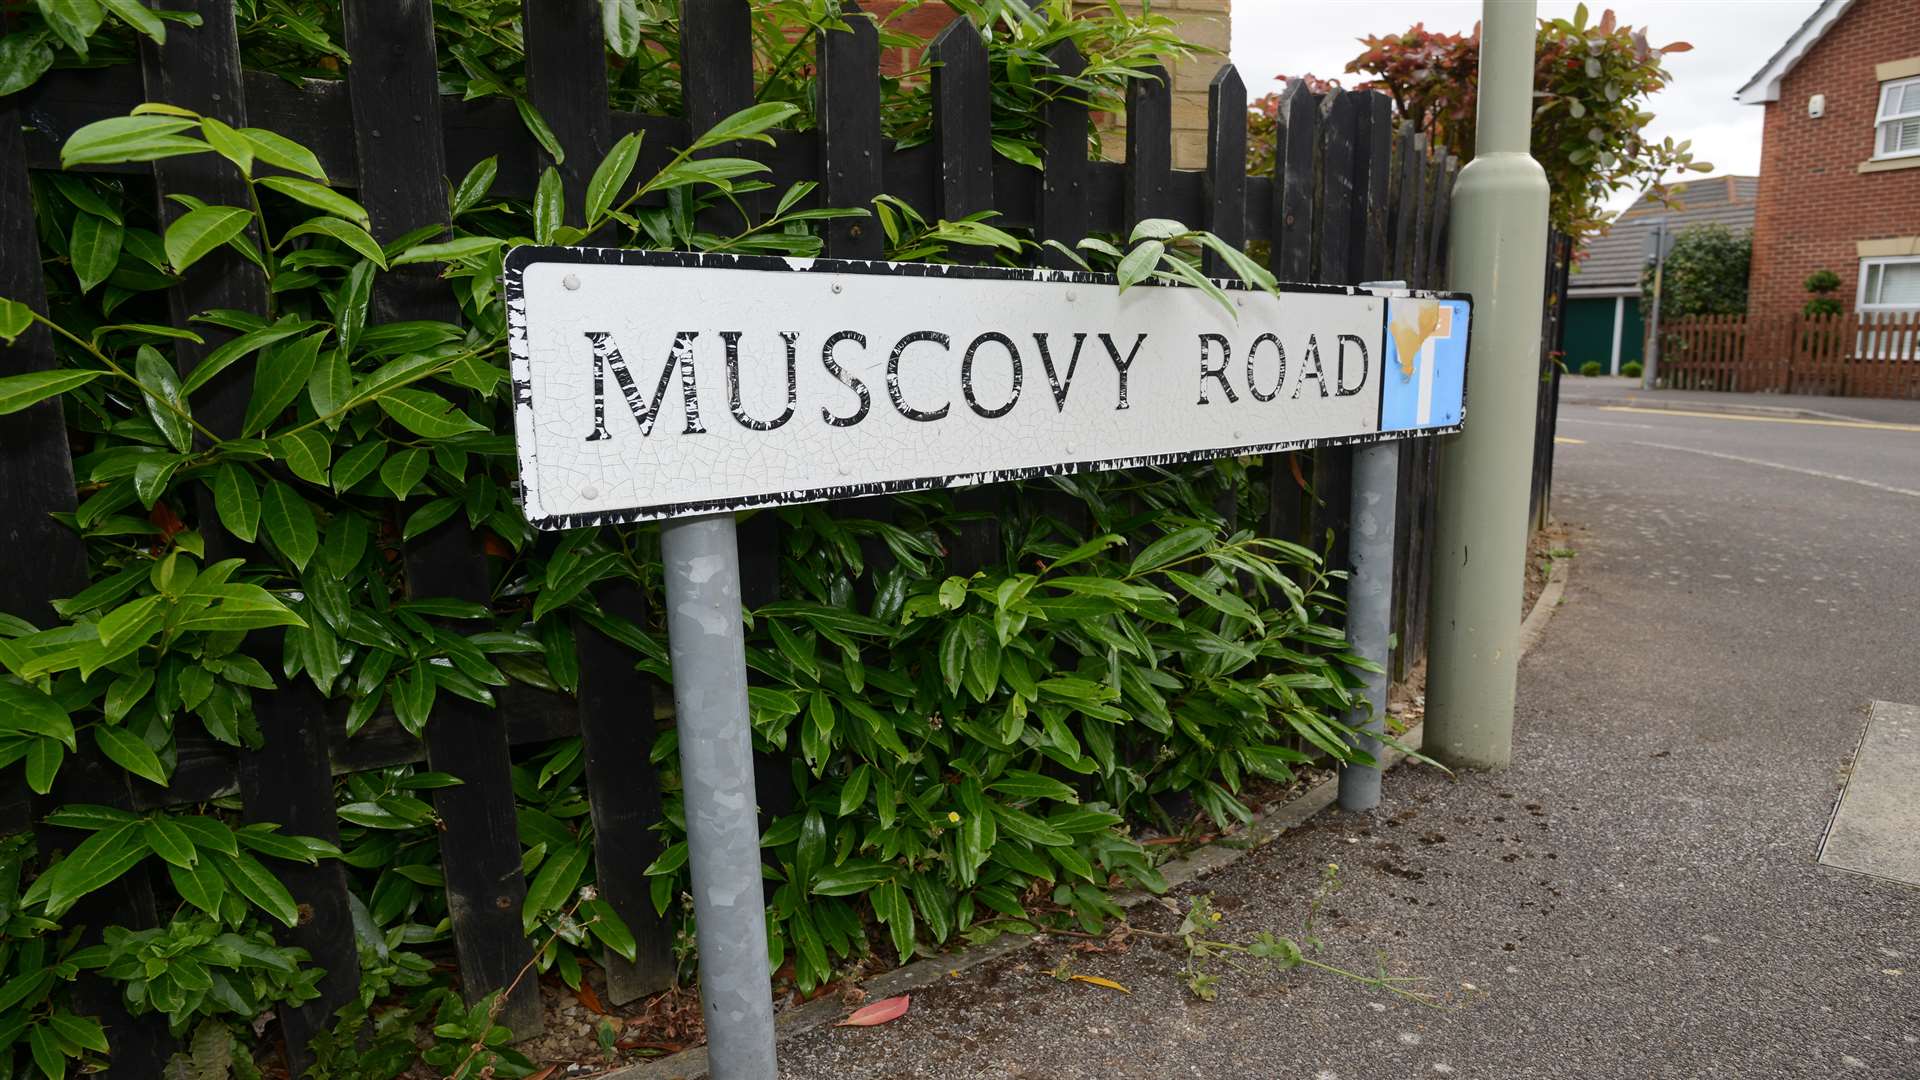 The shooting happened in Muscovy Road, Kennington